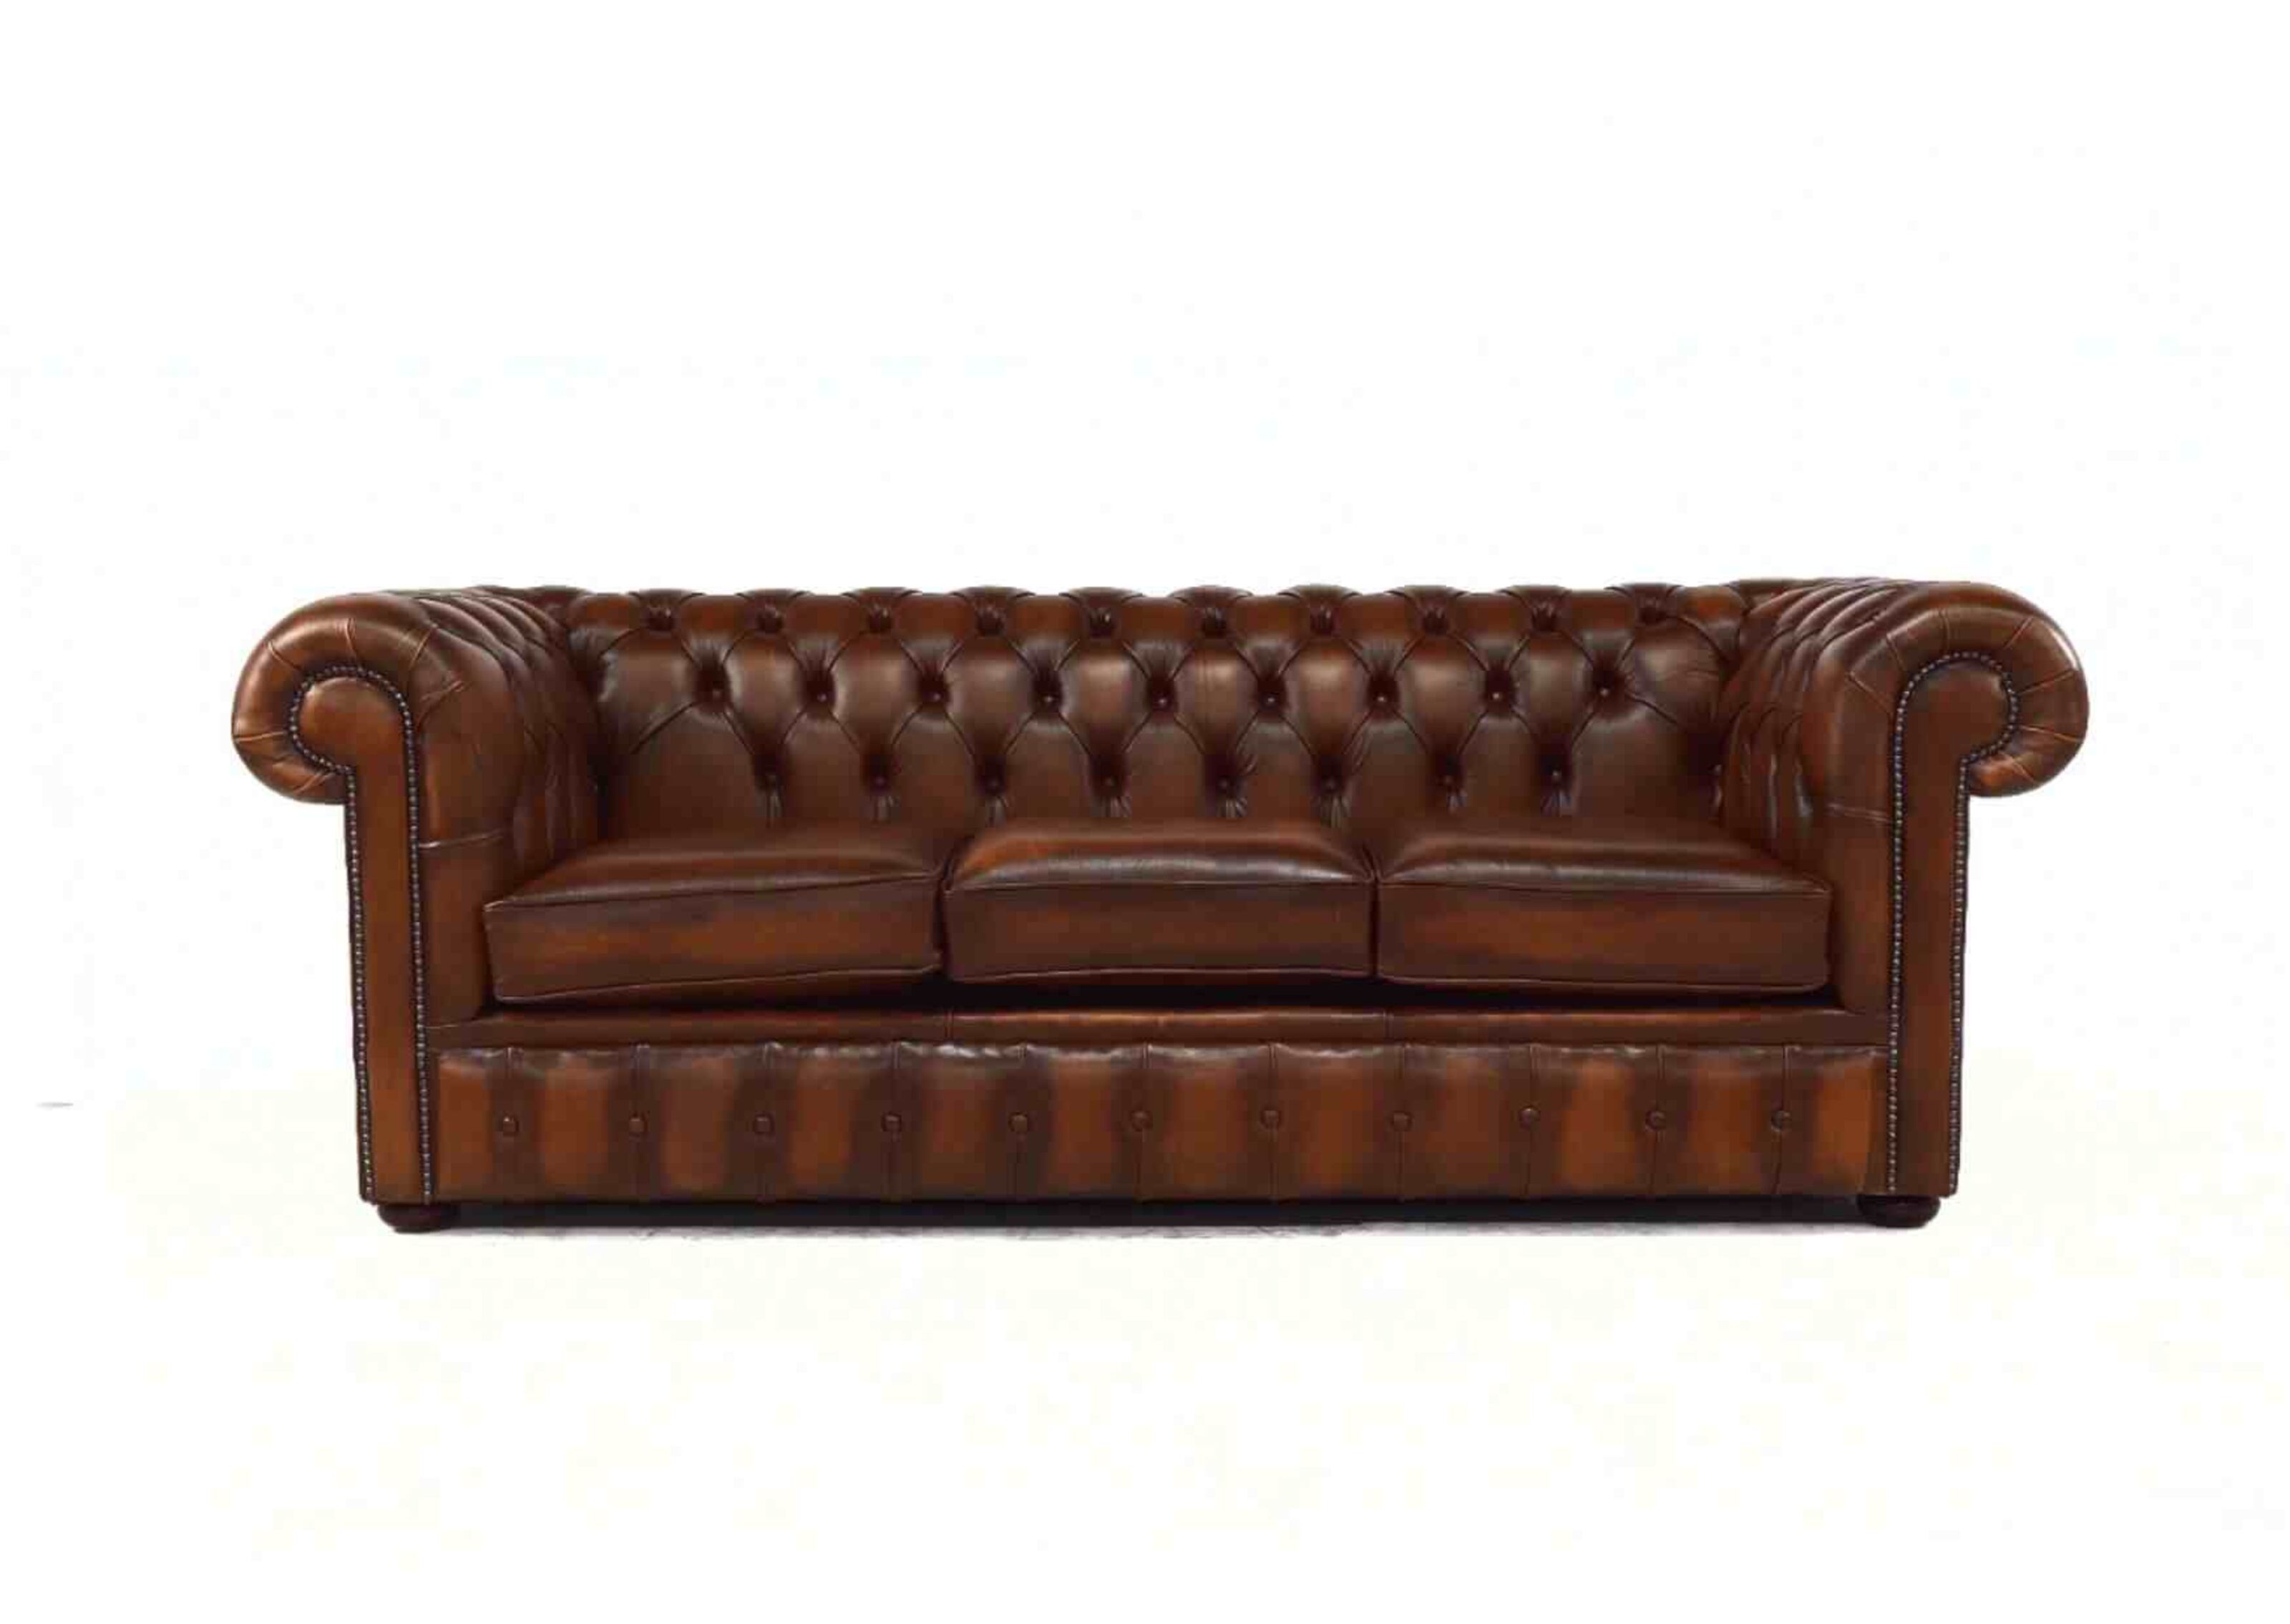 Stylish Seating Solutions: Chesterfield Sofas in Adelaide  %Post Title